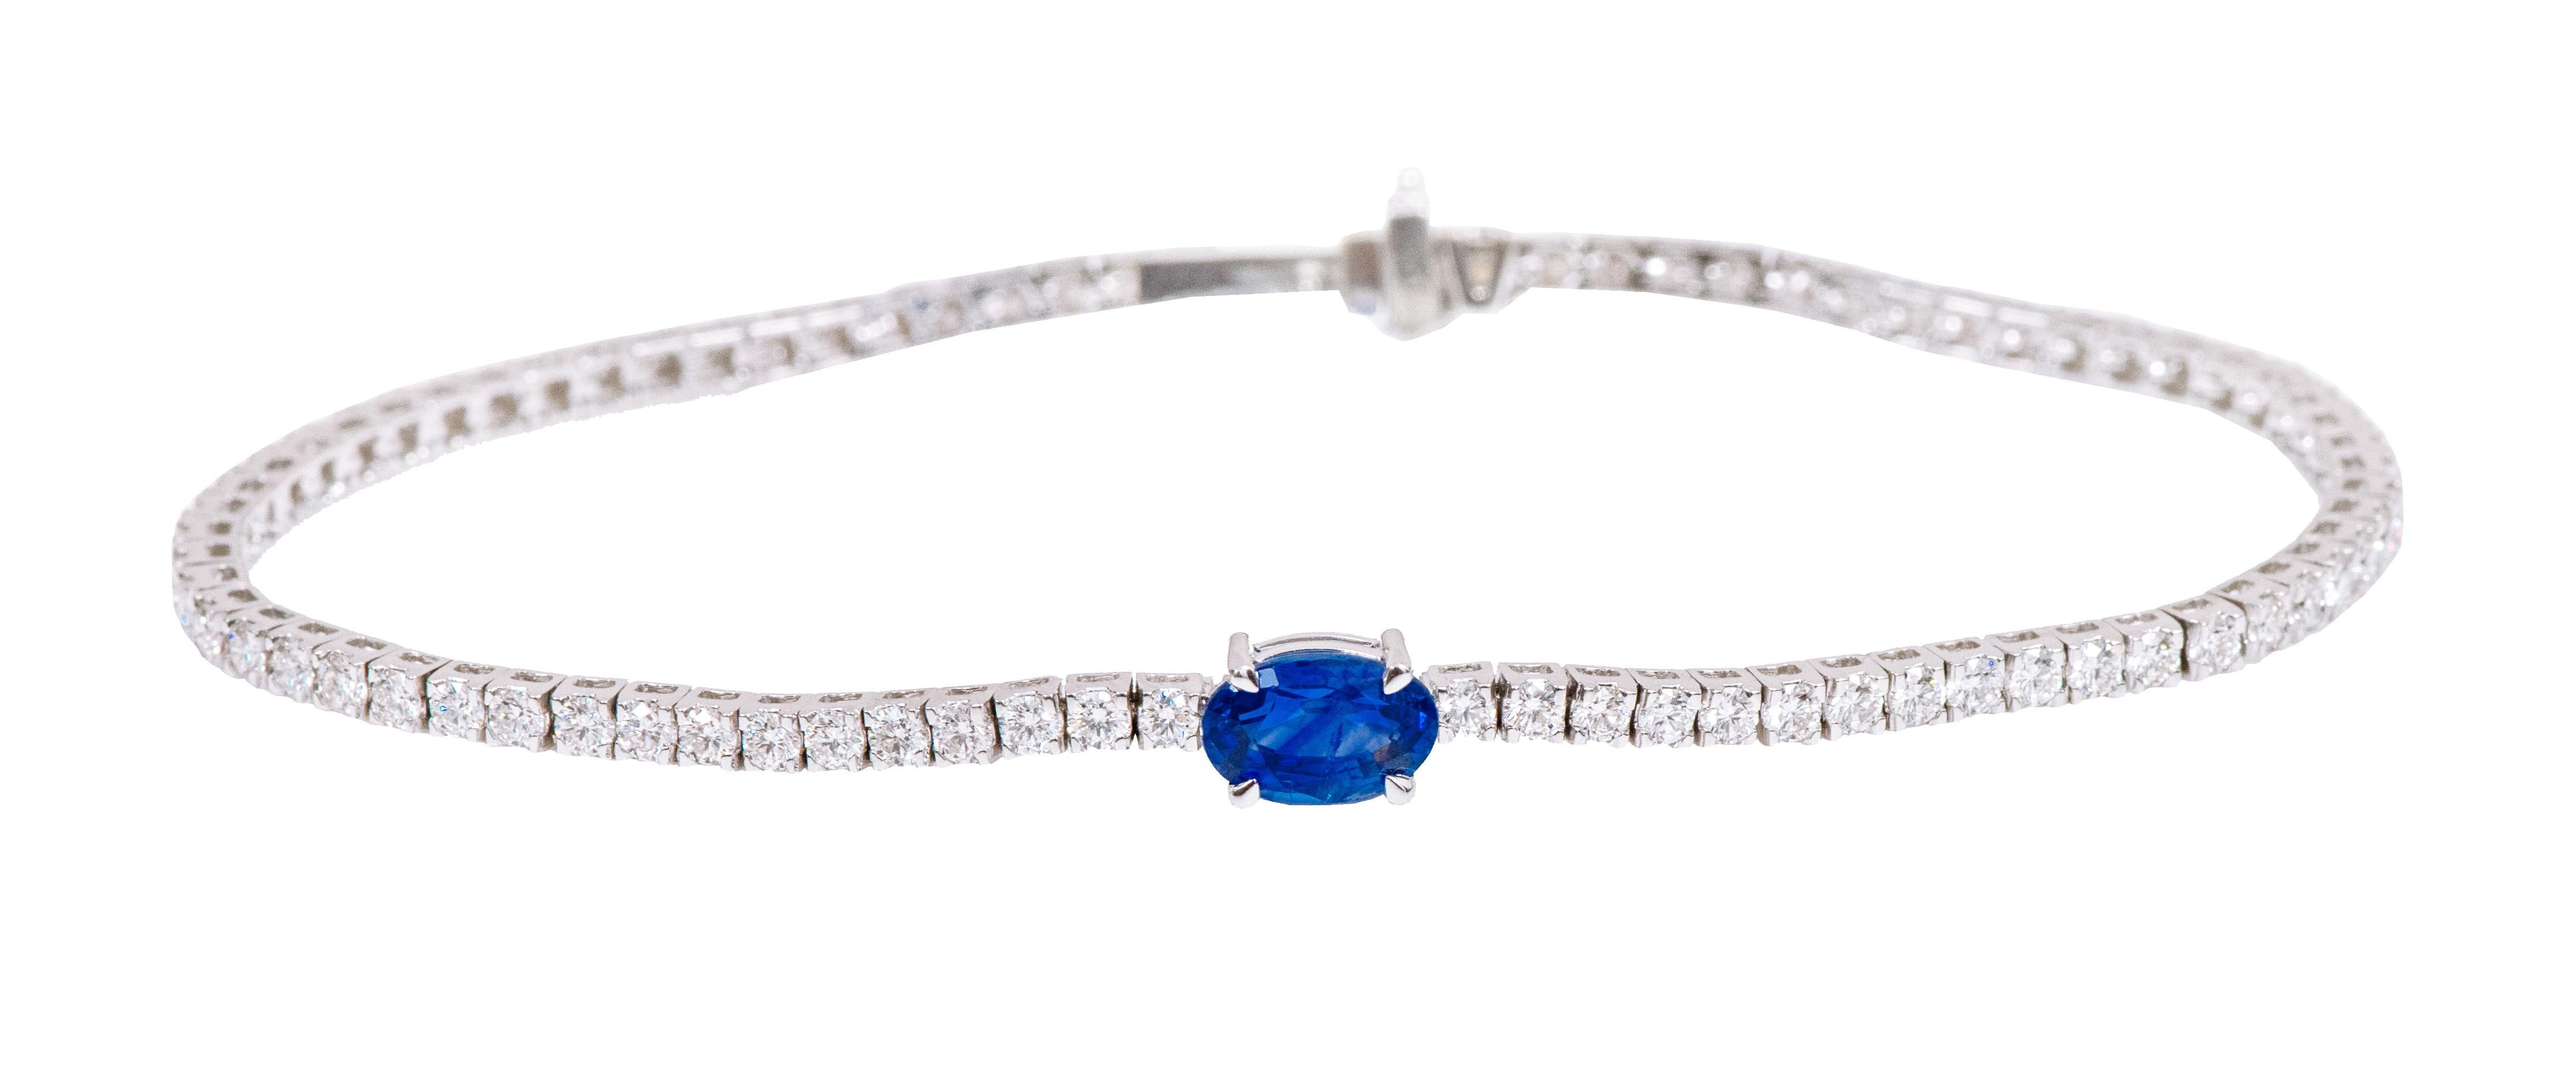 18 Karat White Gold 3.65 Carat Solitaire Blue Sapphire and Diamond Tennis Bracelet 

This exceptional royal blue sapphire and solitaire diamond tennis bracelet is fantastic. The classic tennis bracelet with identical, perfect cut and crowned round